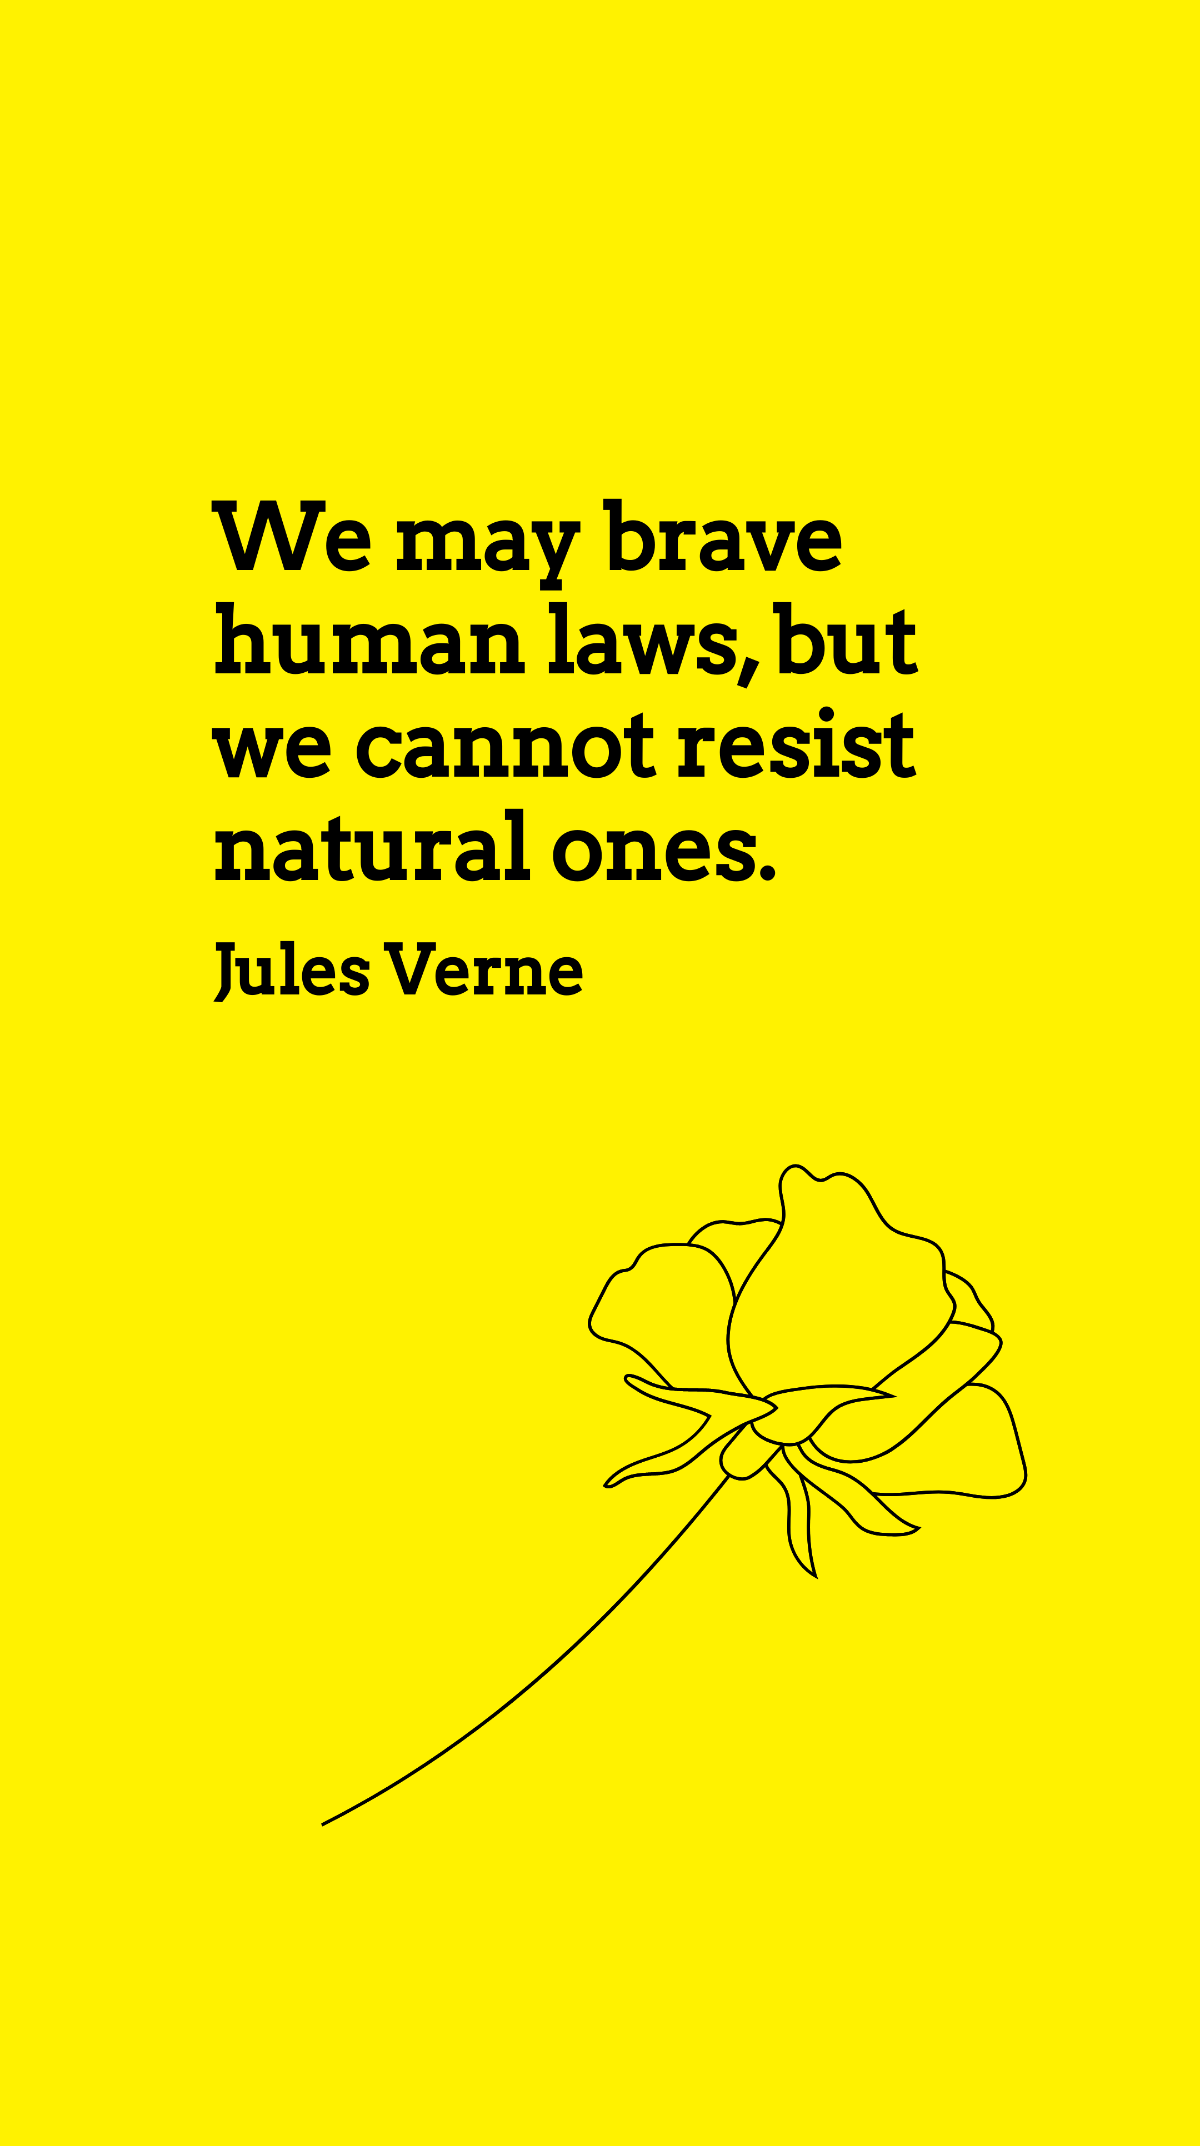 Free Jules Verne - We may brave human laws, but we cannot resist natural ones. Template